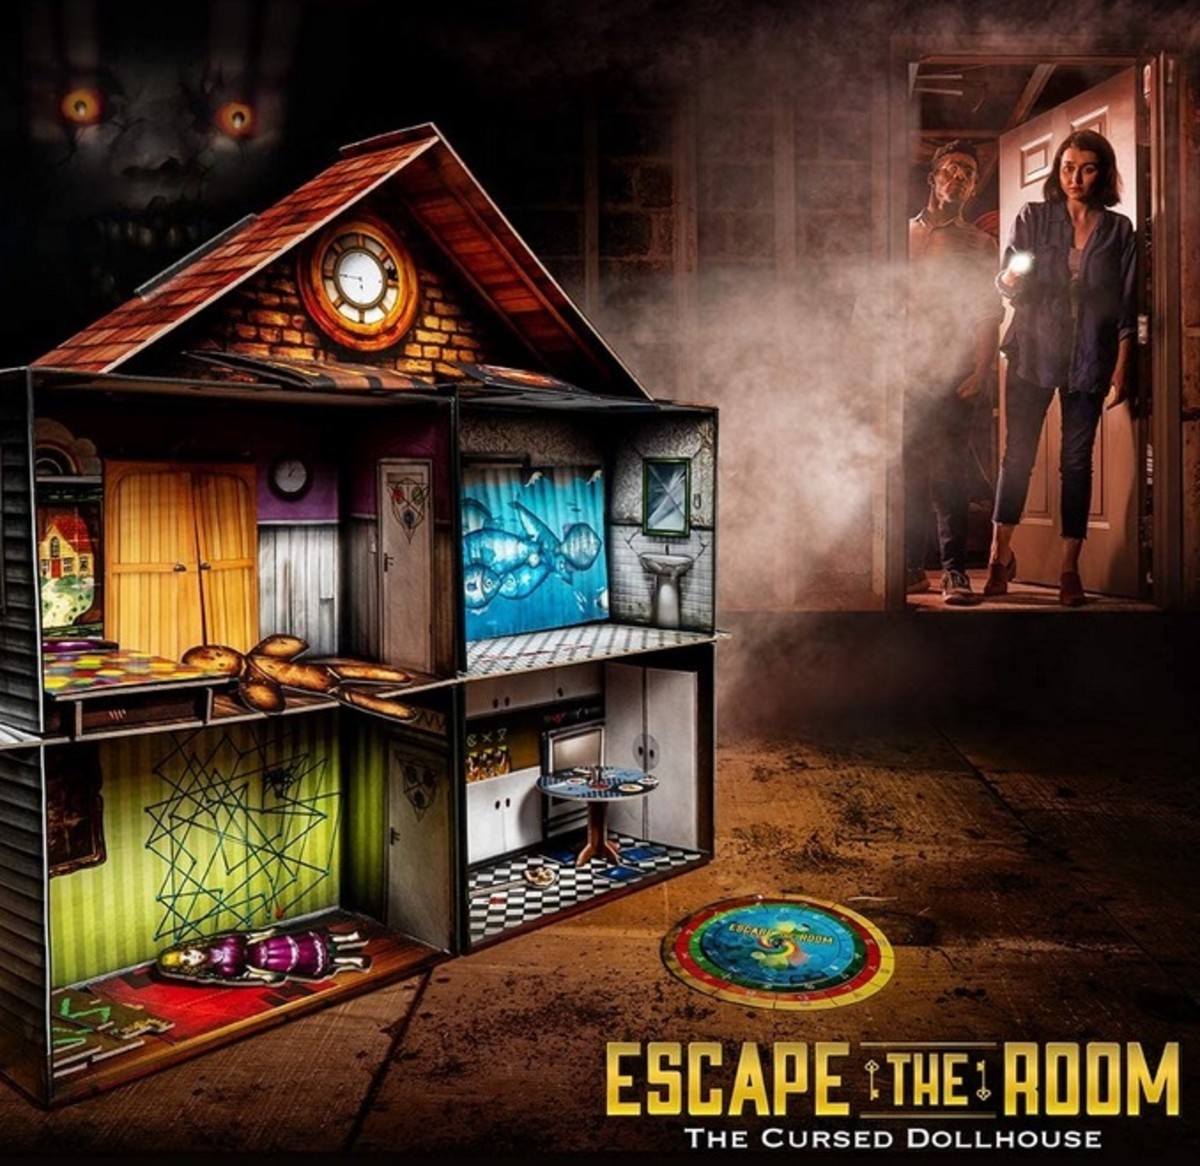 Escape The Room: The Cursed Dollhouse Is A 3D Locked Room Game